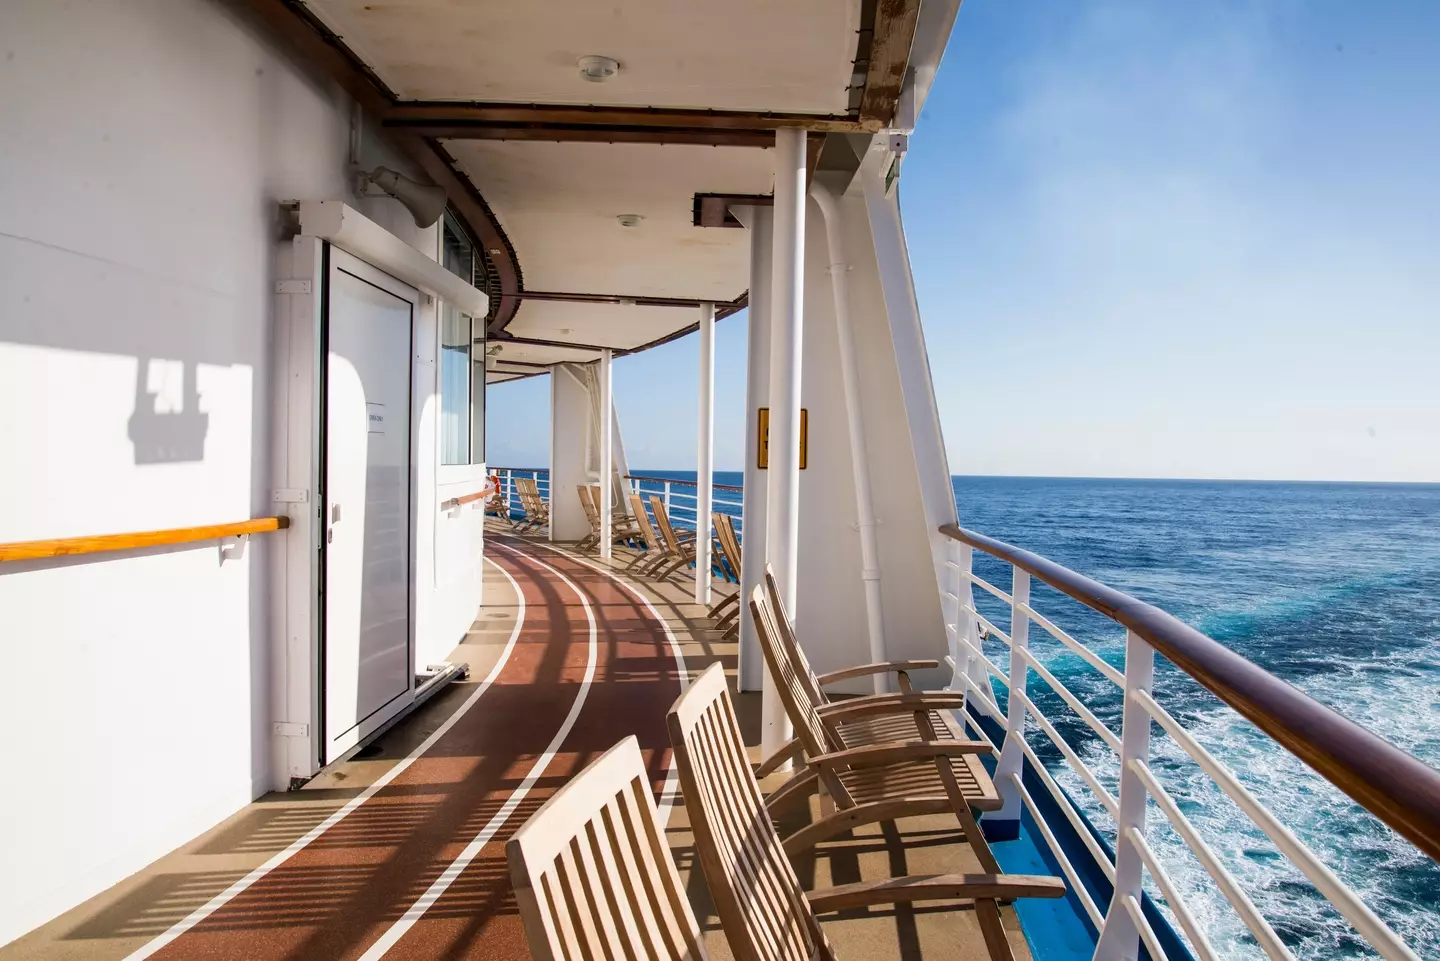 Cruise ship deck (Getty Stock Images)